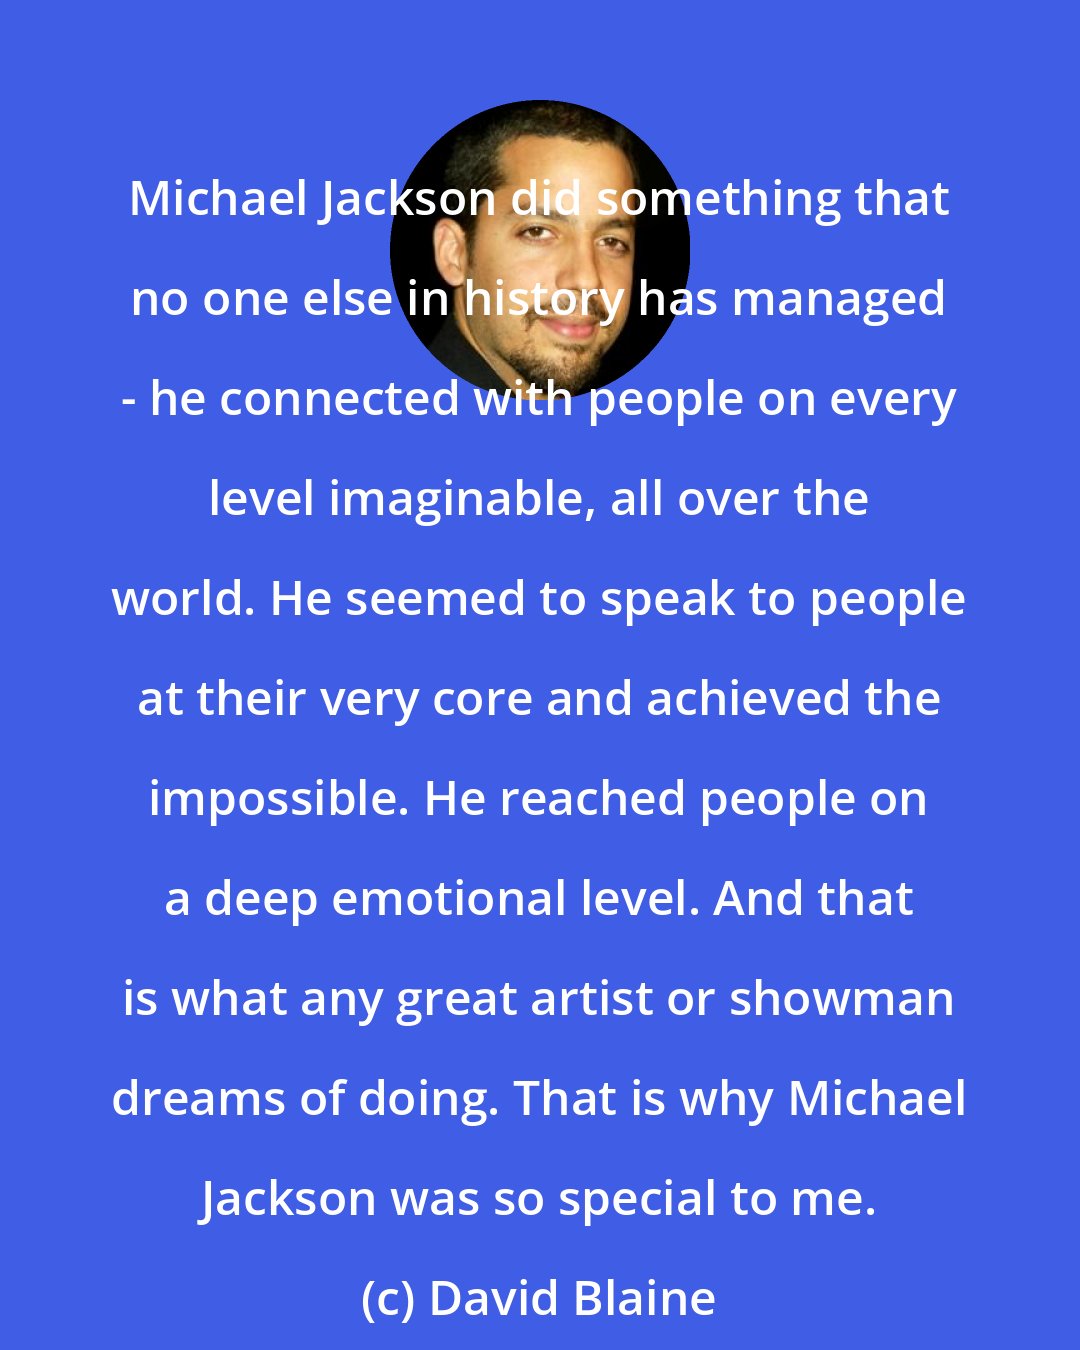 David Blaine: Michael Jackson did something that no one else in history has managed - he connected with people on every level imaginable, all over the world. He seemed to speak to people at their very core and achieved the impossible. He reached people on a deep emotional level. And that is what any great artist or showman dreams of doing. That is why Michael Jackson was so special to me.